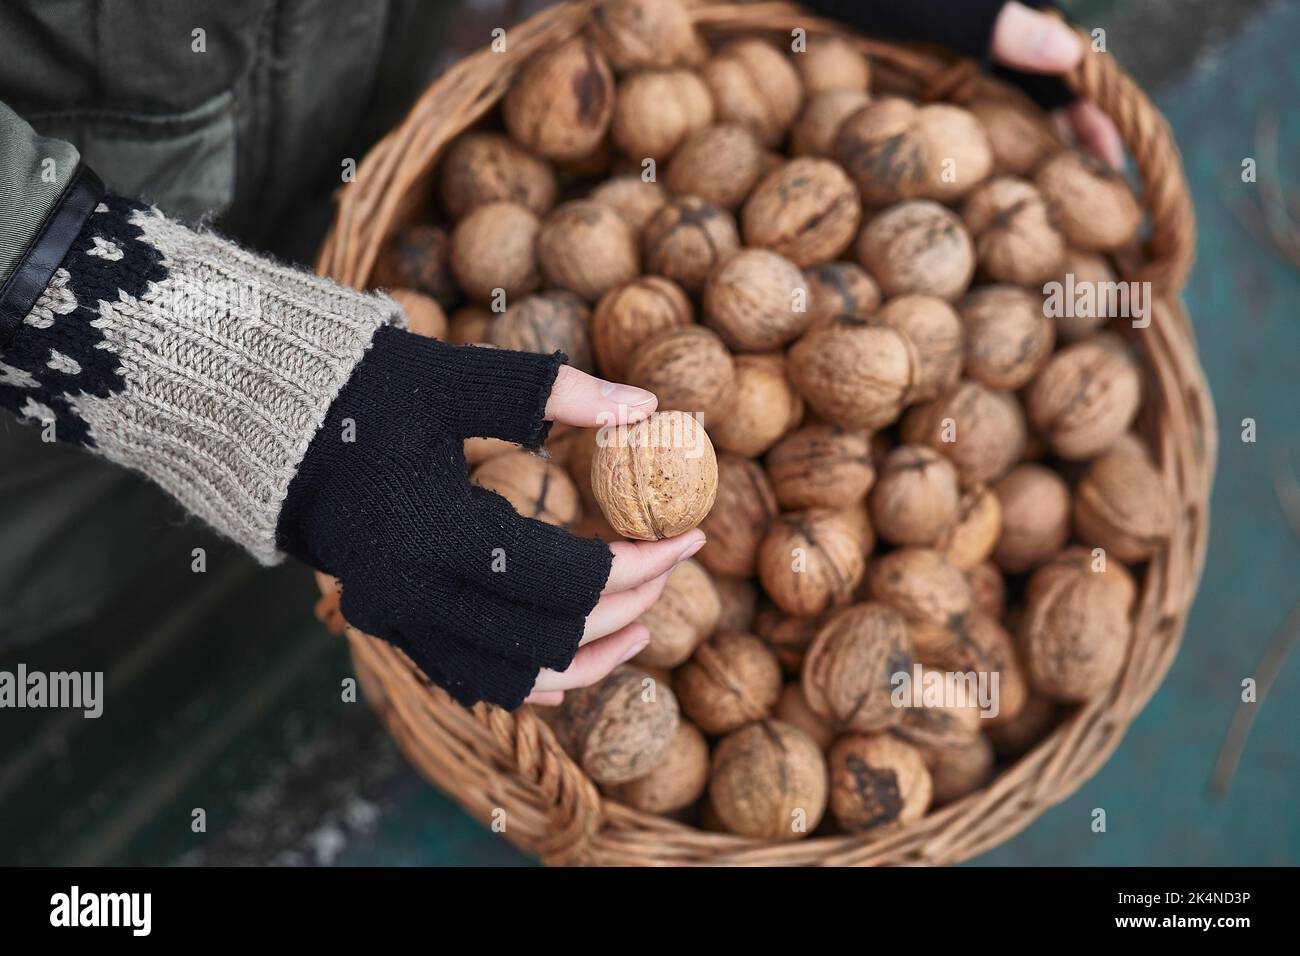 Collecting walnuts in a basket Stock Photo